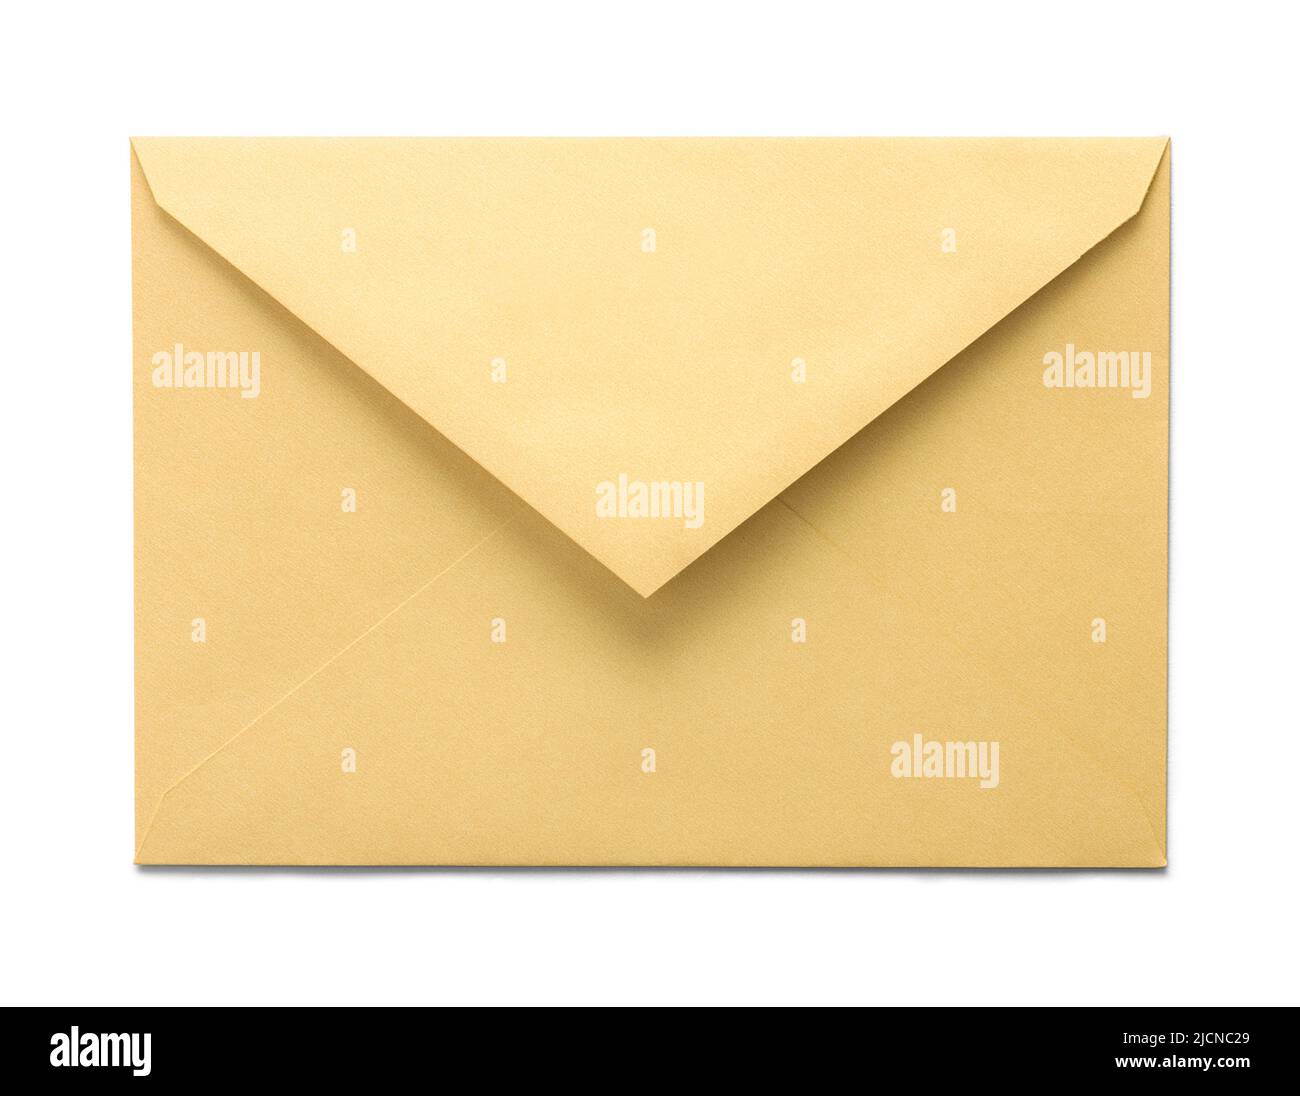 Open Yellow Paper Envelope Cut Out on White. Stock Photo